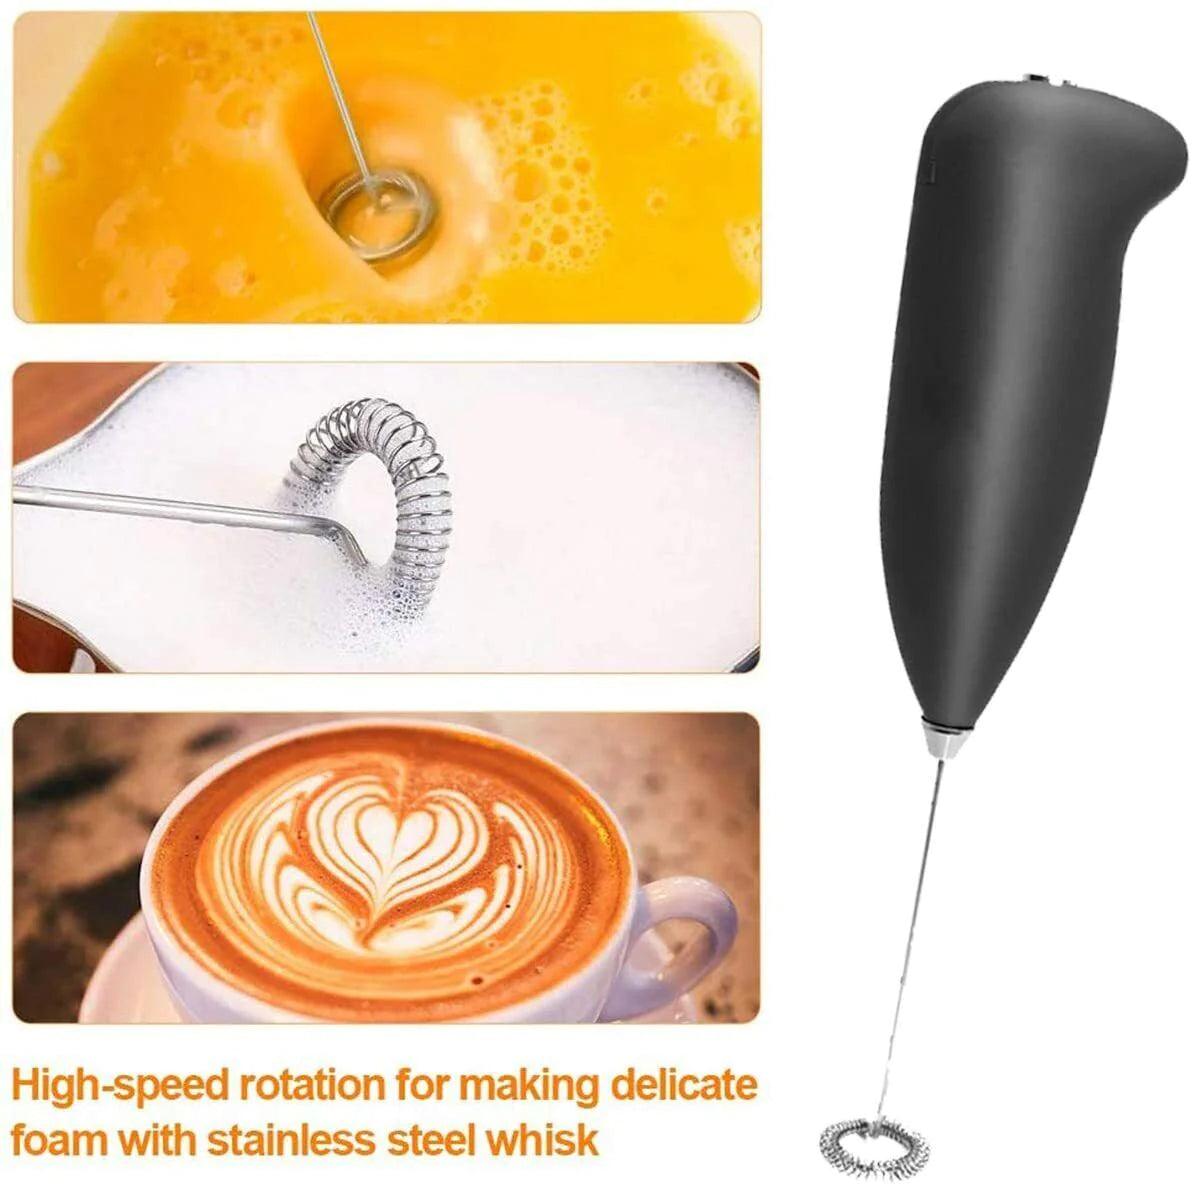 Electric Milk Frother Drink Foamer Whisk Mixer Stirrer Coffee Maker Eggbeater